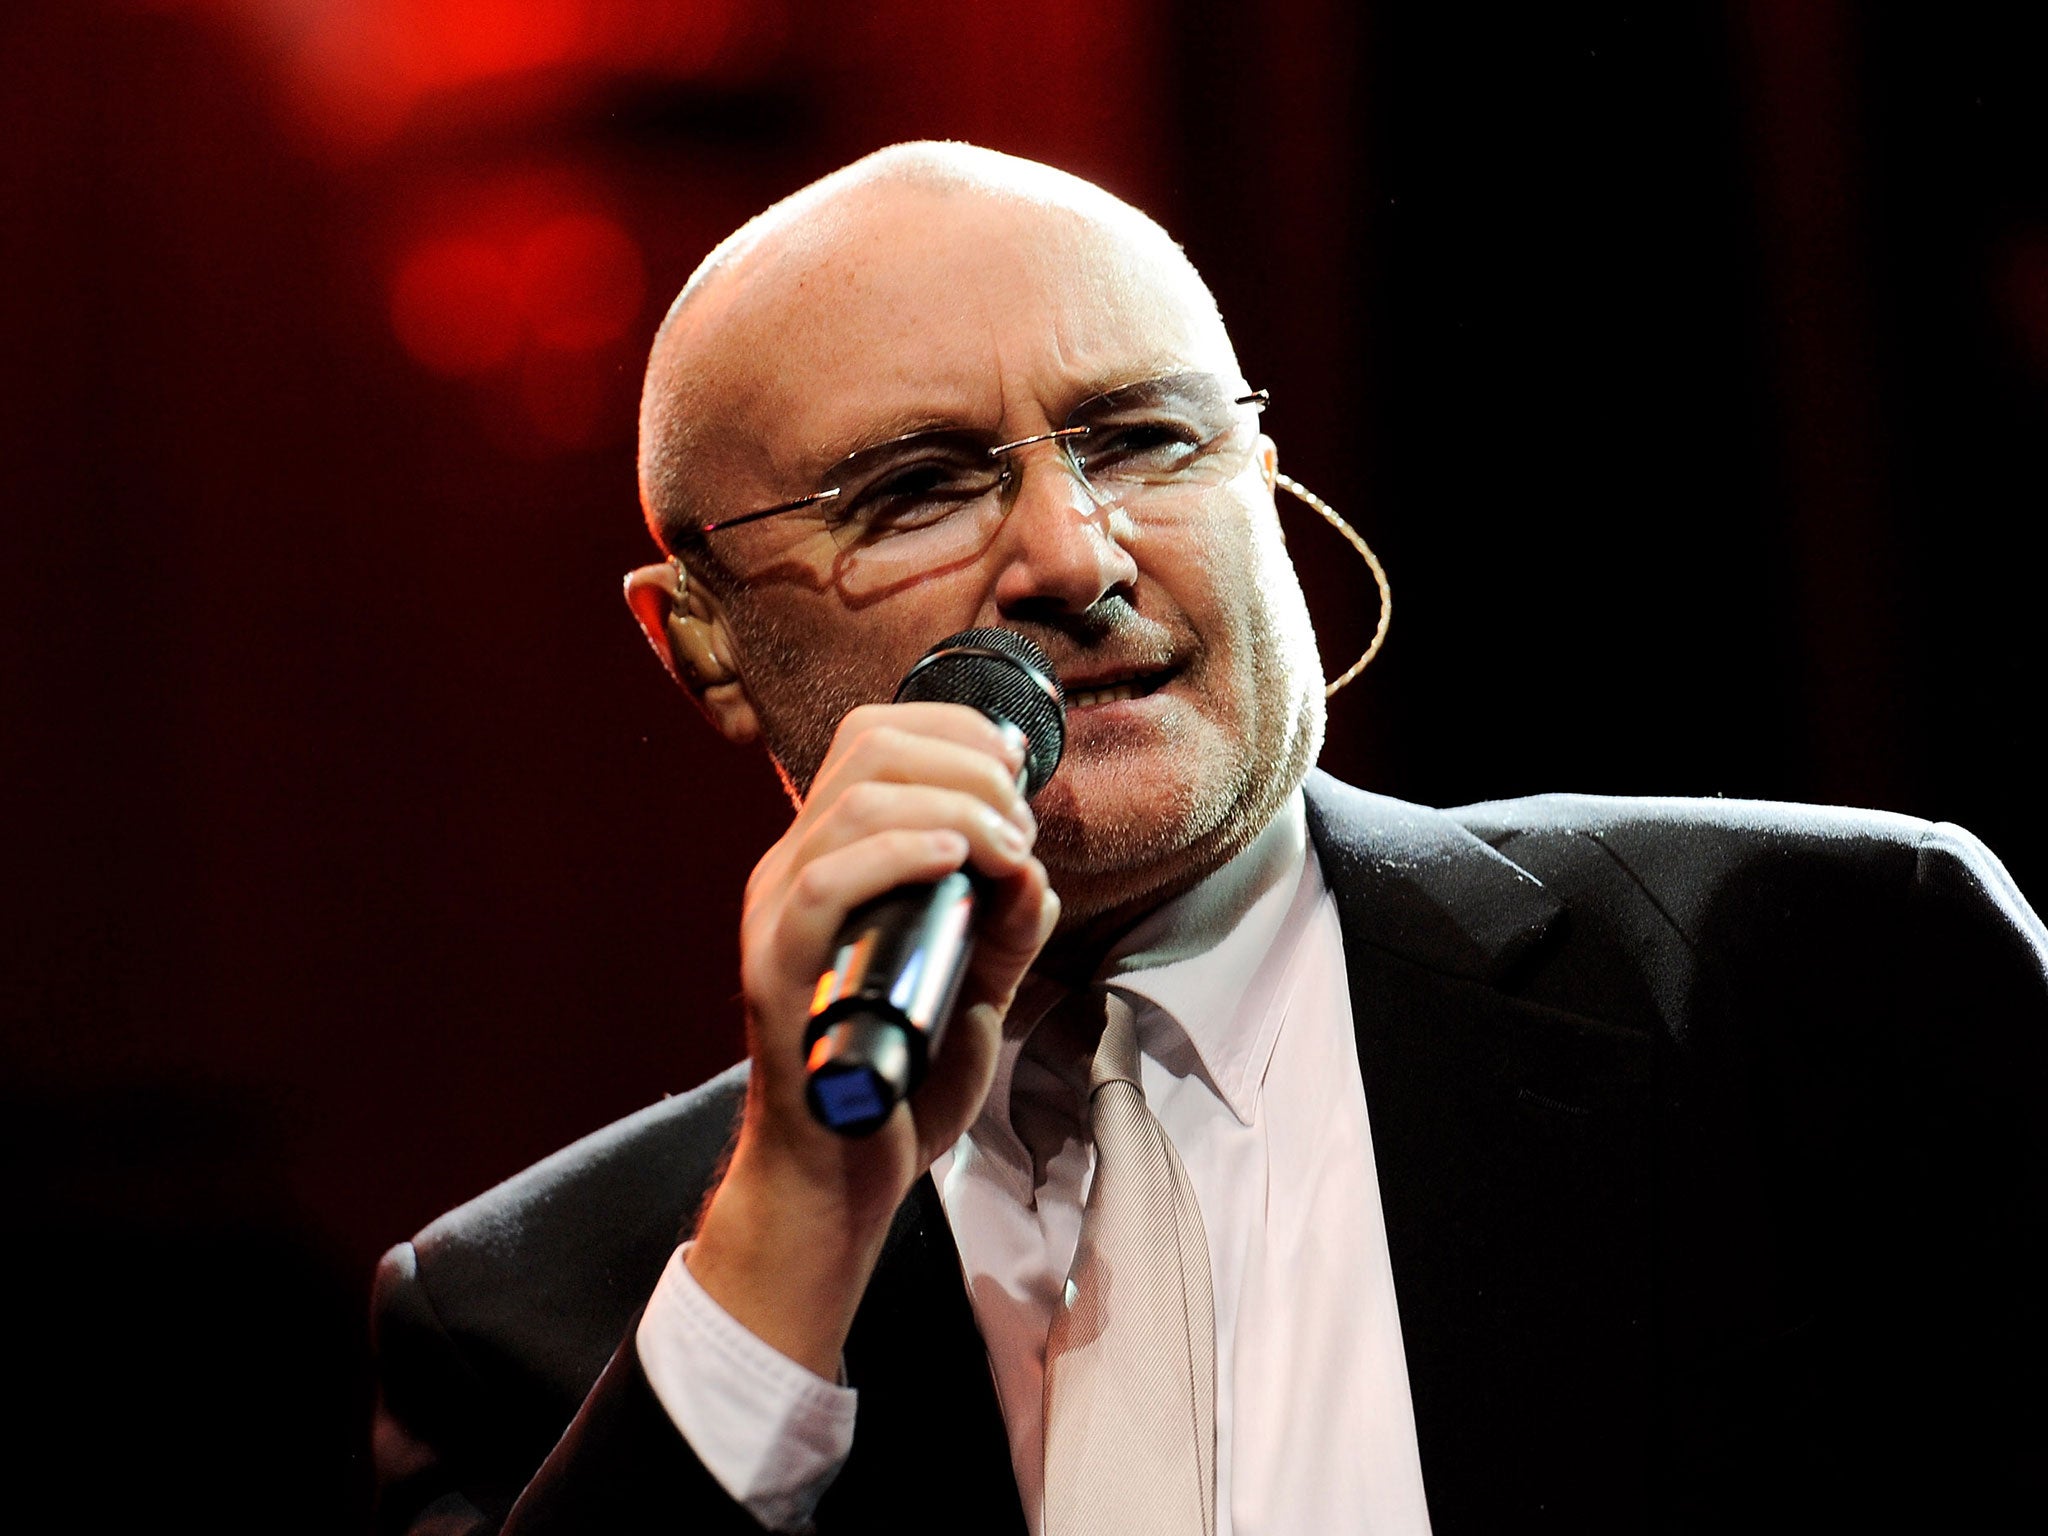 Phil Collins has performed at his sons' school concert for the first time since retiring in 2011